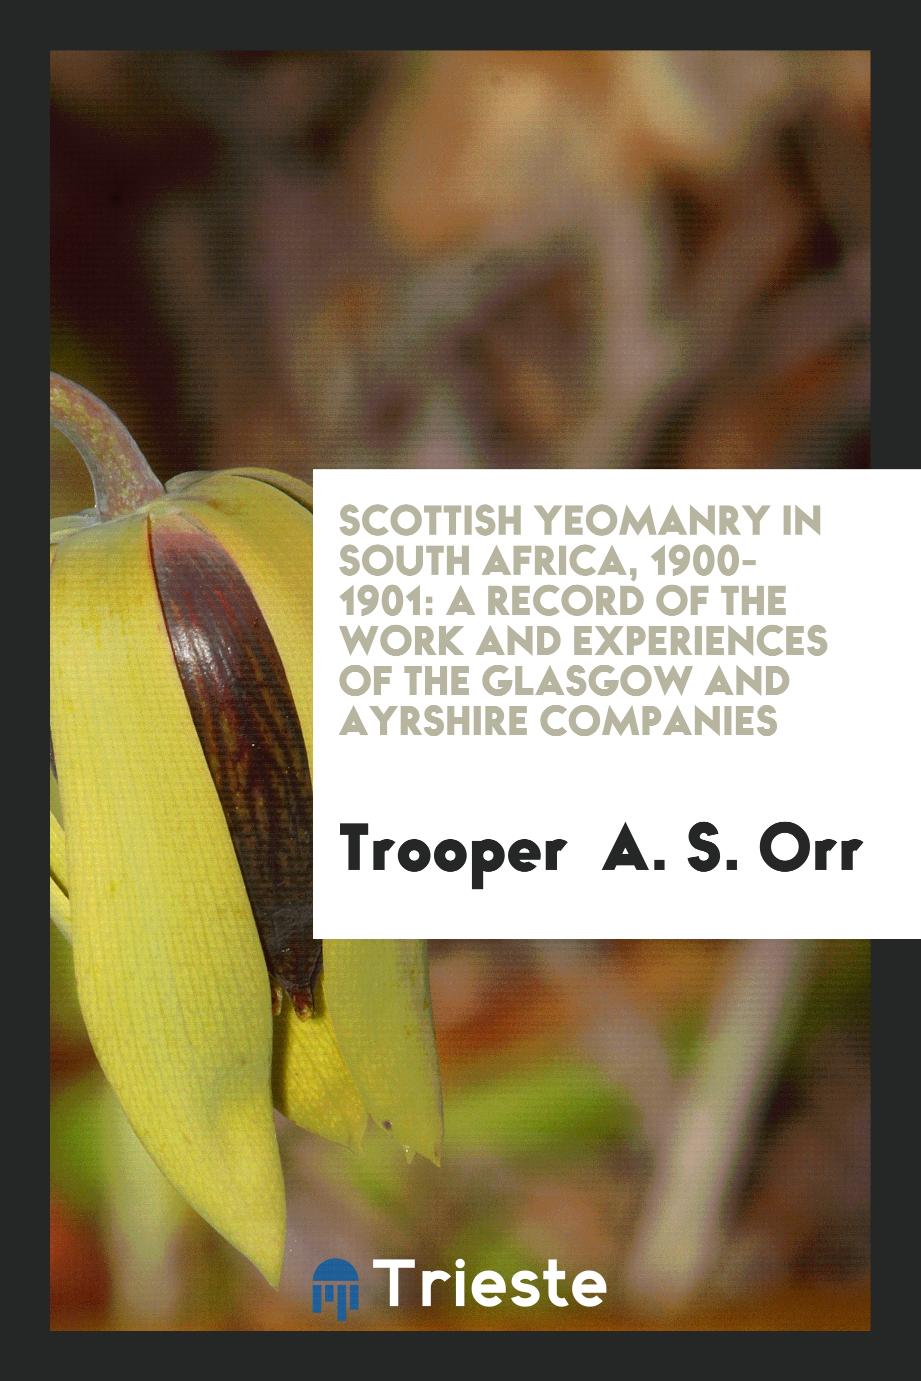 Scottish Yeomanry in South Africa, 1900-1901: A Record of the Work and Experiences of the Glasgow and Ayrshire Companies